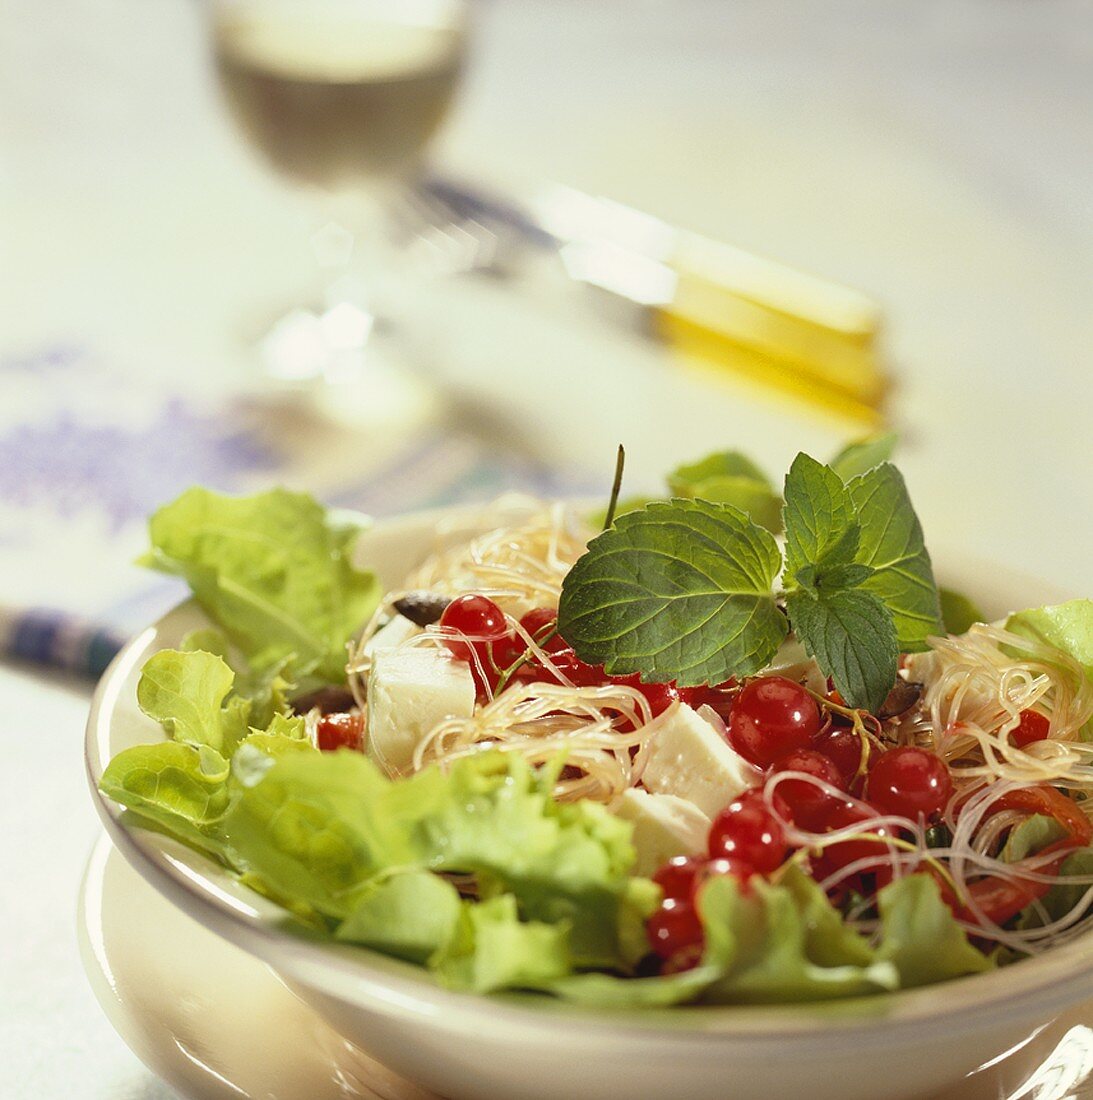 Gourmet salad with glass noodles, cheese and redcurrants